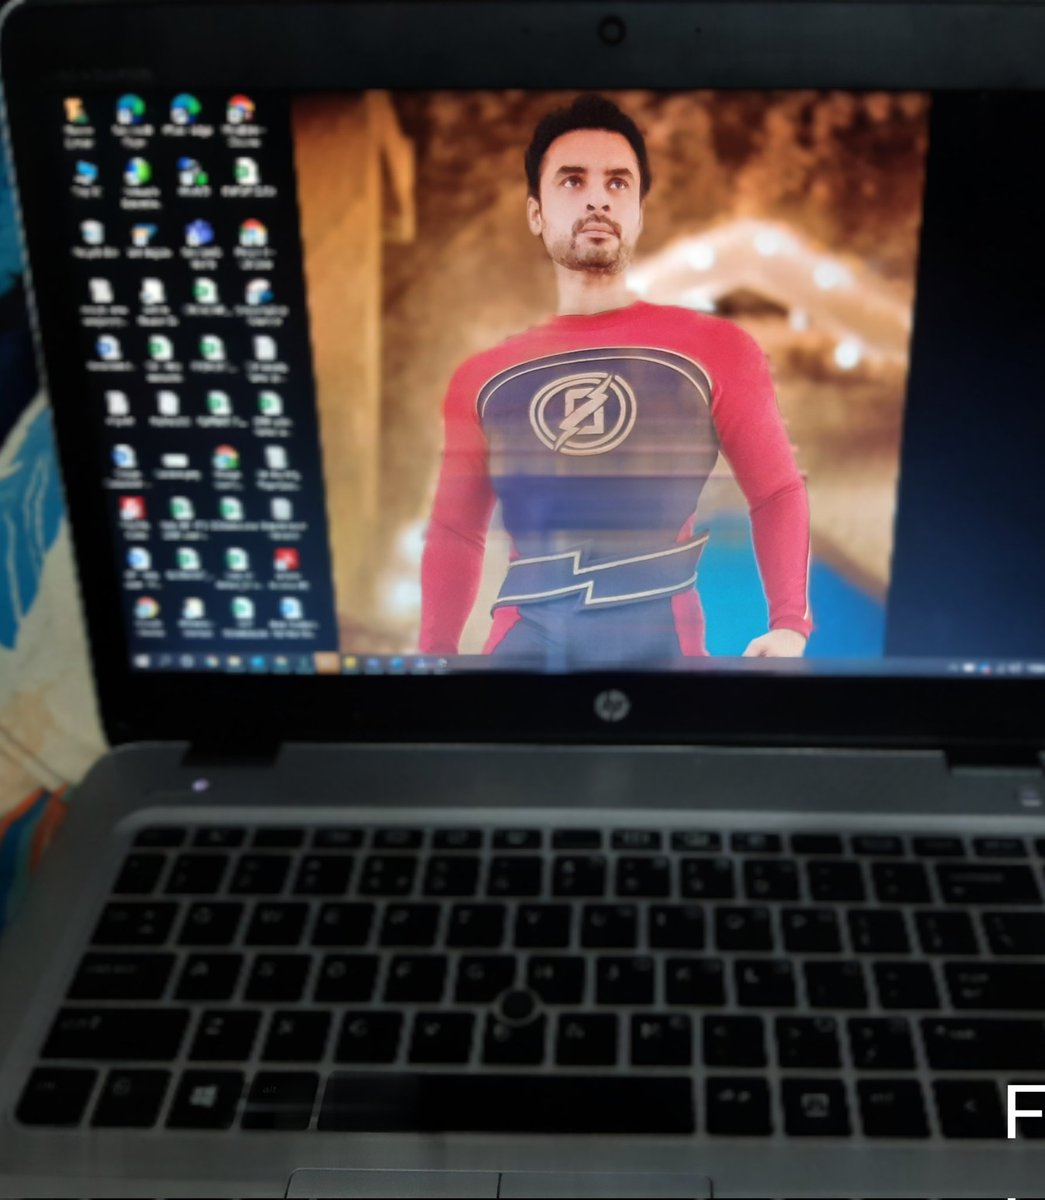 #MinnalMurali is so famous in Greece and UK that when I shared my desktop for an online meeting today (as Tovino is my laptop background)... immediately my colleagues from different countries were able to identify @ttovino !! 
Cheers!! #MyfavTovino #IndianSuperHero